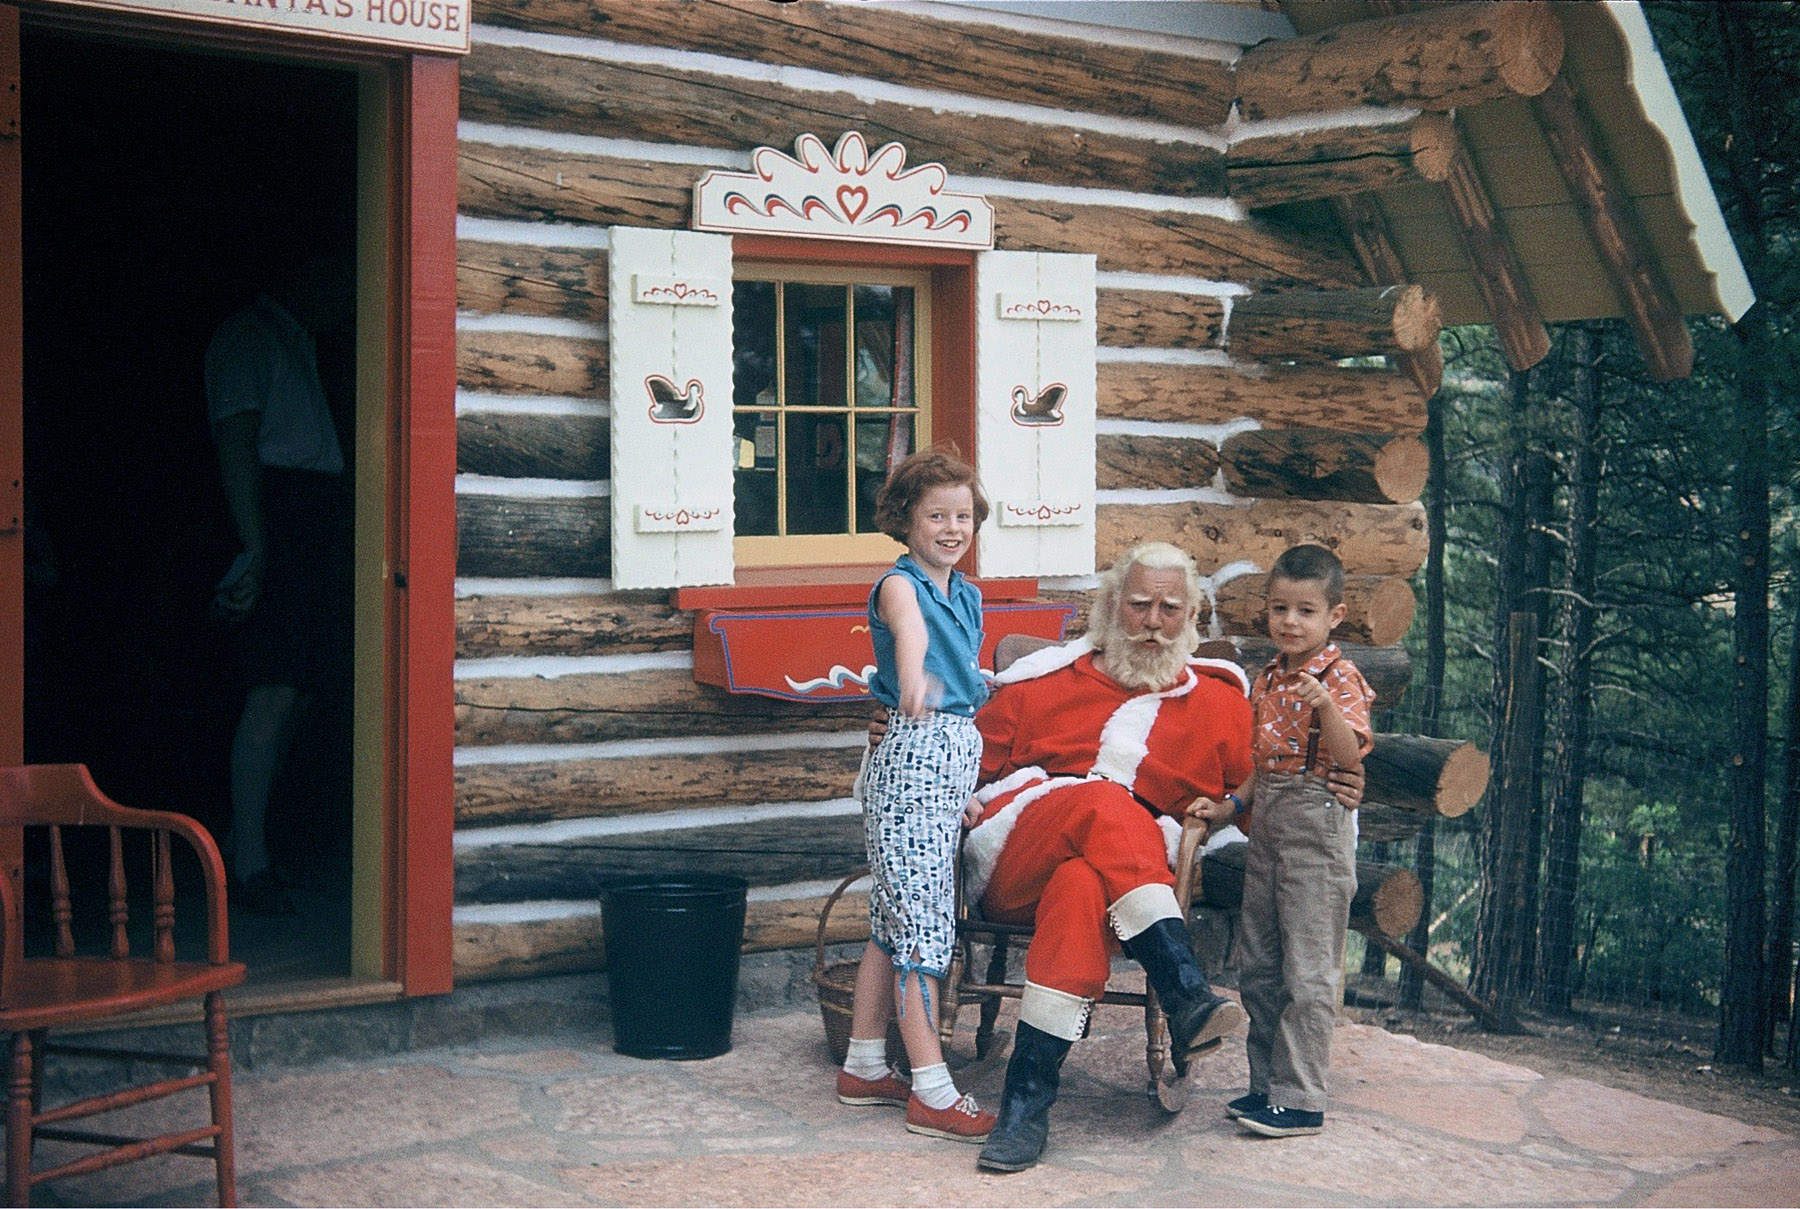 My dad (6 years old) and his older sister in 1956 at "North Pole Colorado -- Home of Santa's Workshop" at the foot of Pike's Peak. Santa sure looks jolly. Full size.